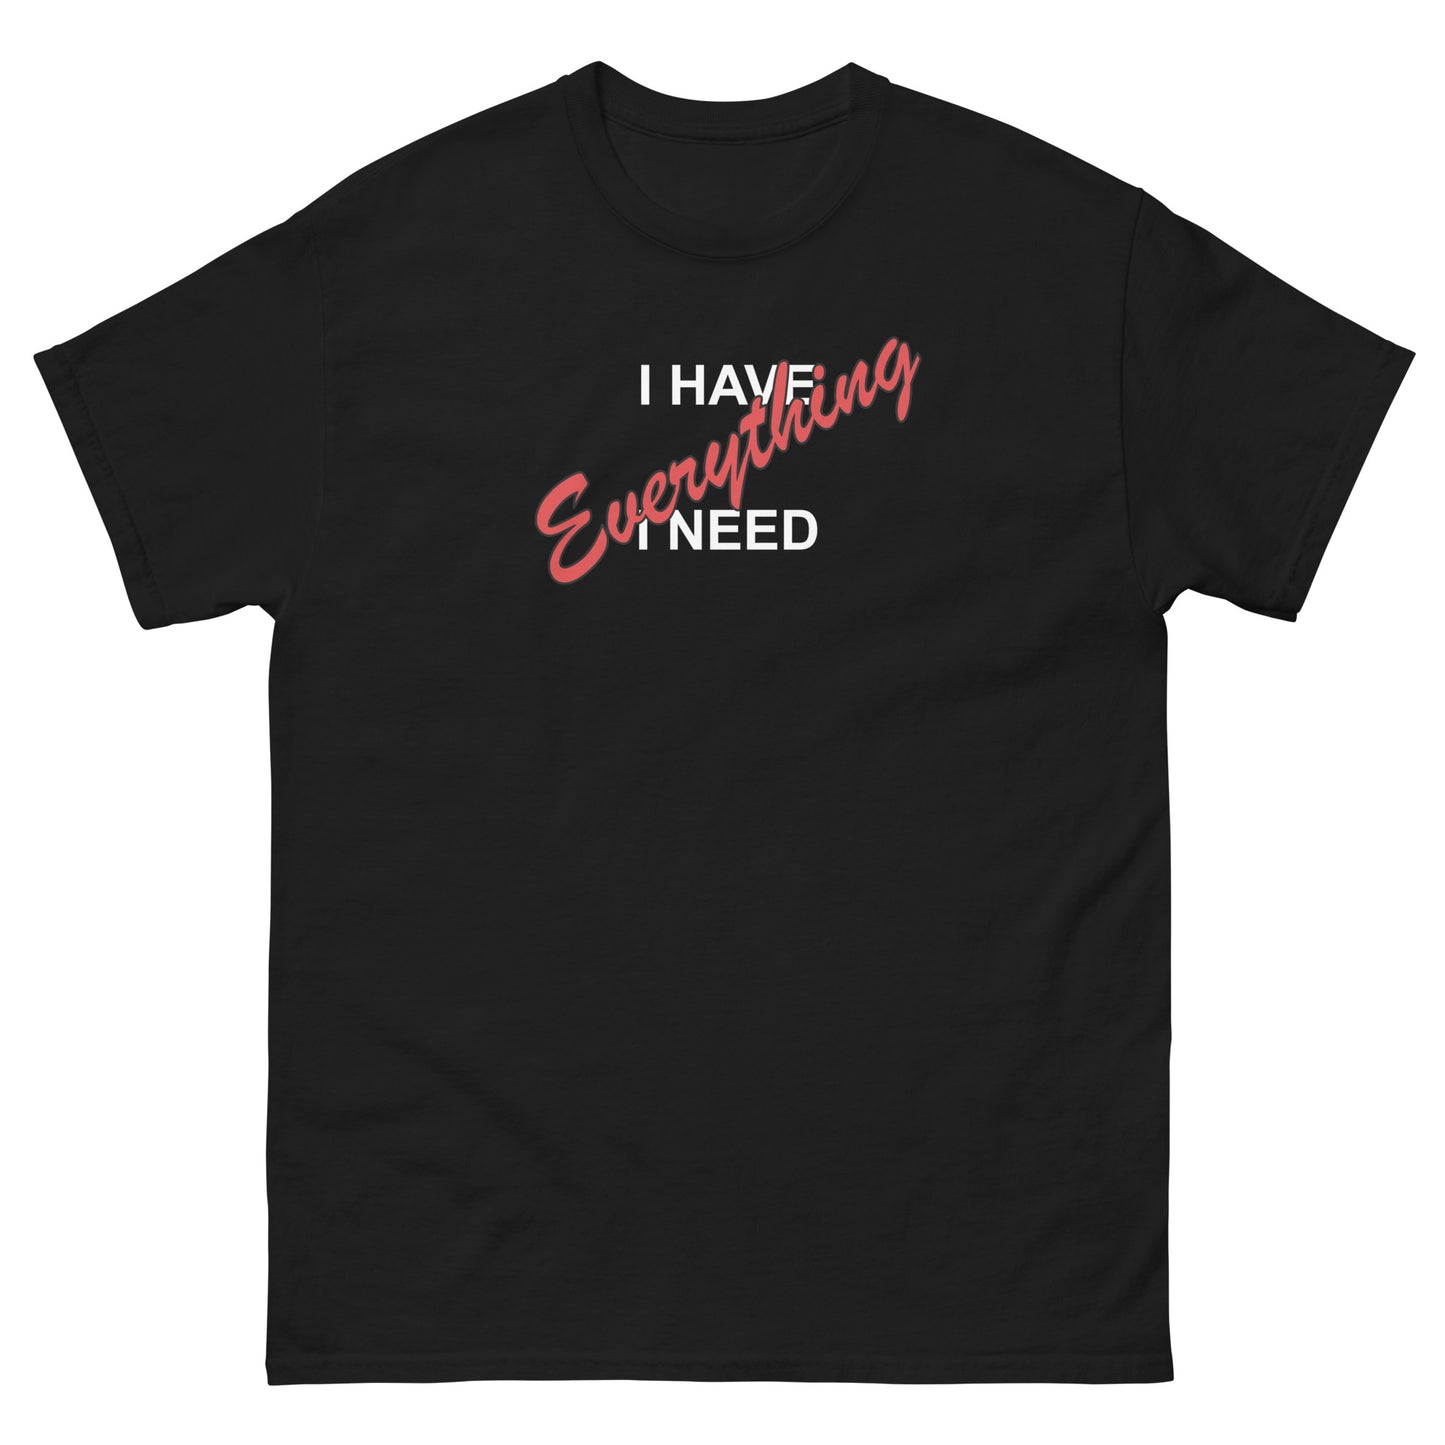 I HAVE EVERYTHING I NEED (white outlined letters) - Unisex